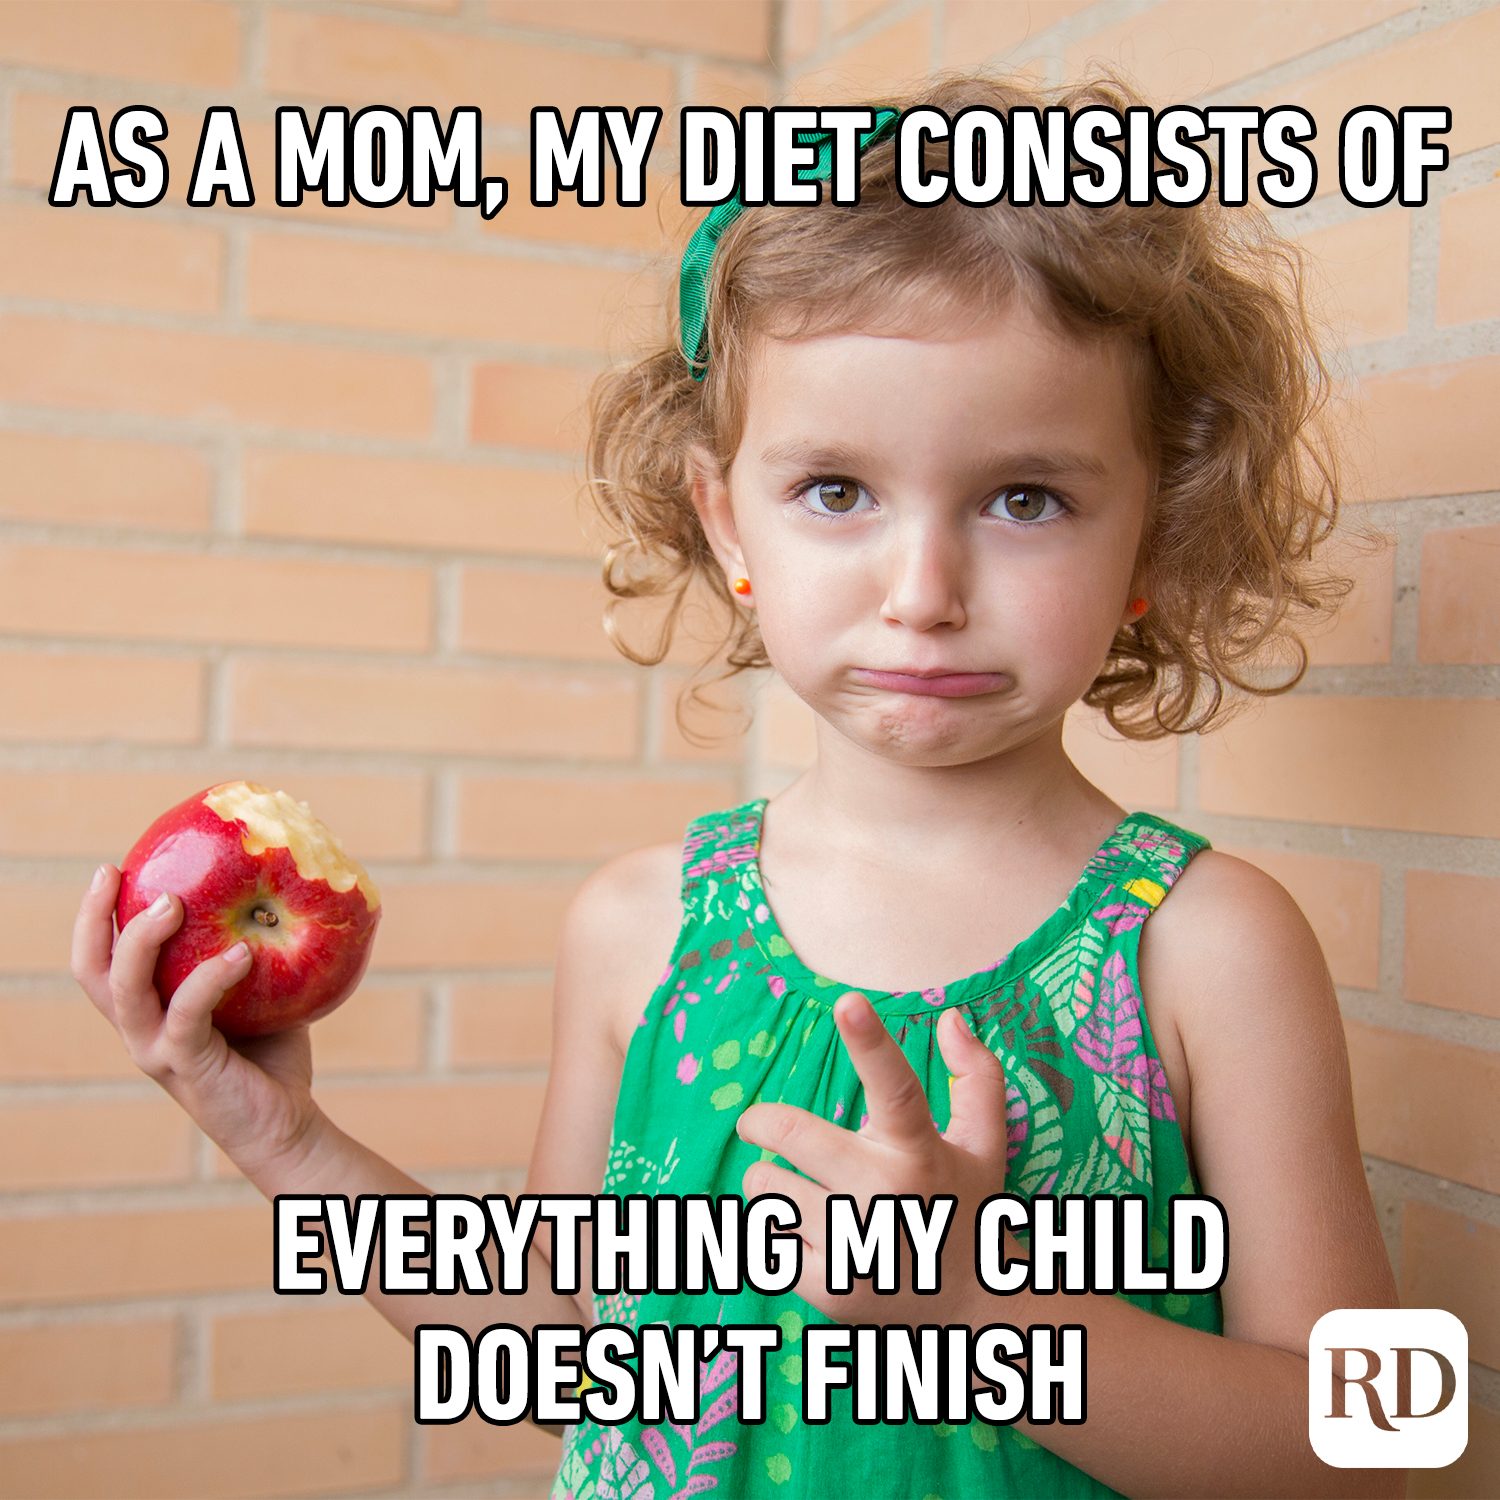 As a mom, my diet consists of everything my child doesn't finish.